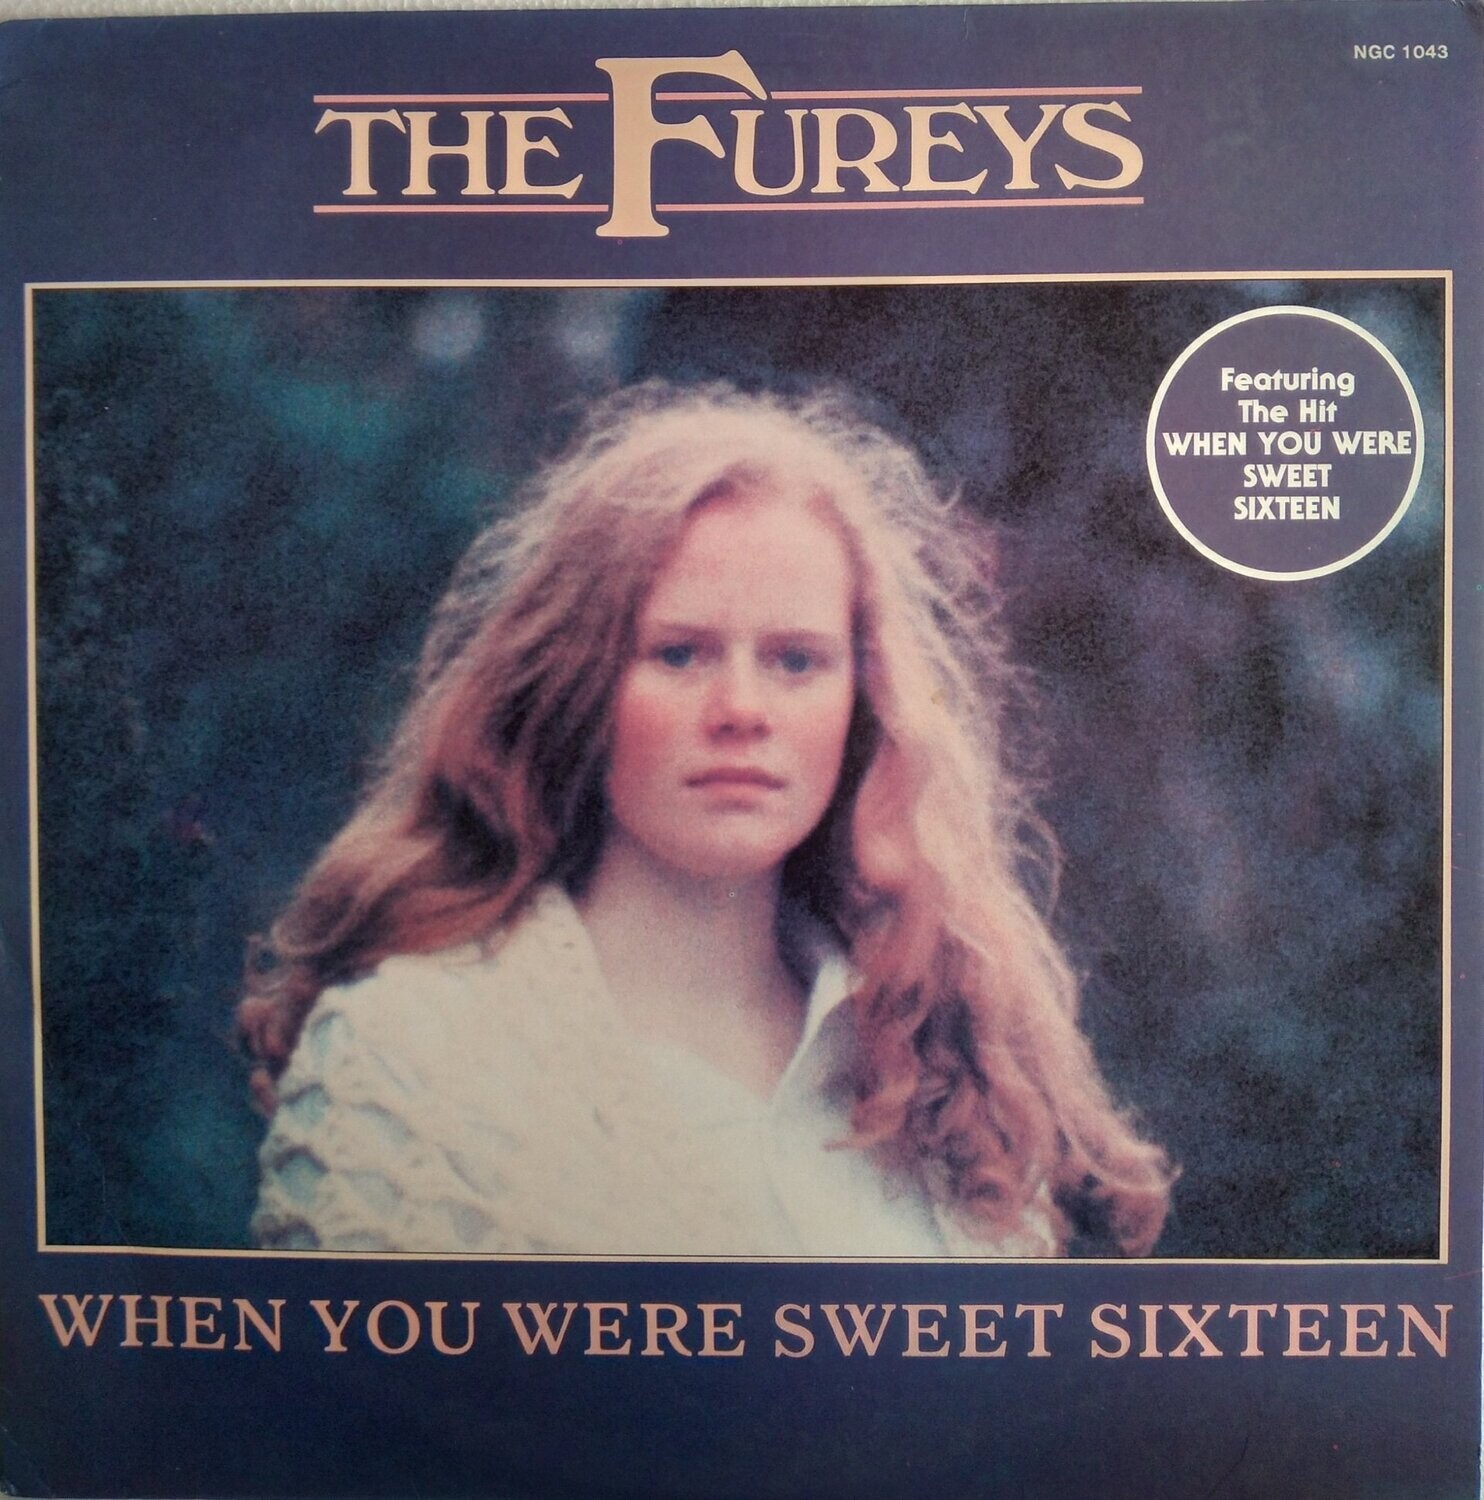 The Fureys - When you were sweet sixteen (1982)